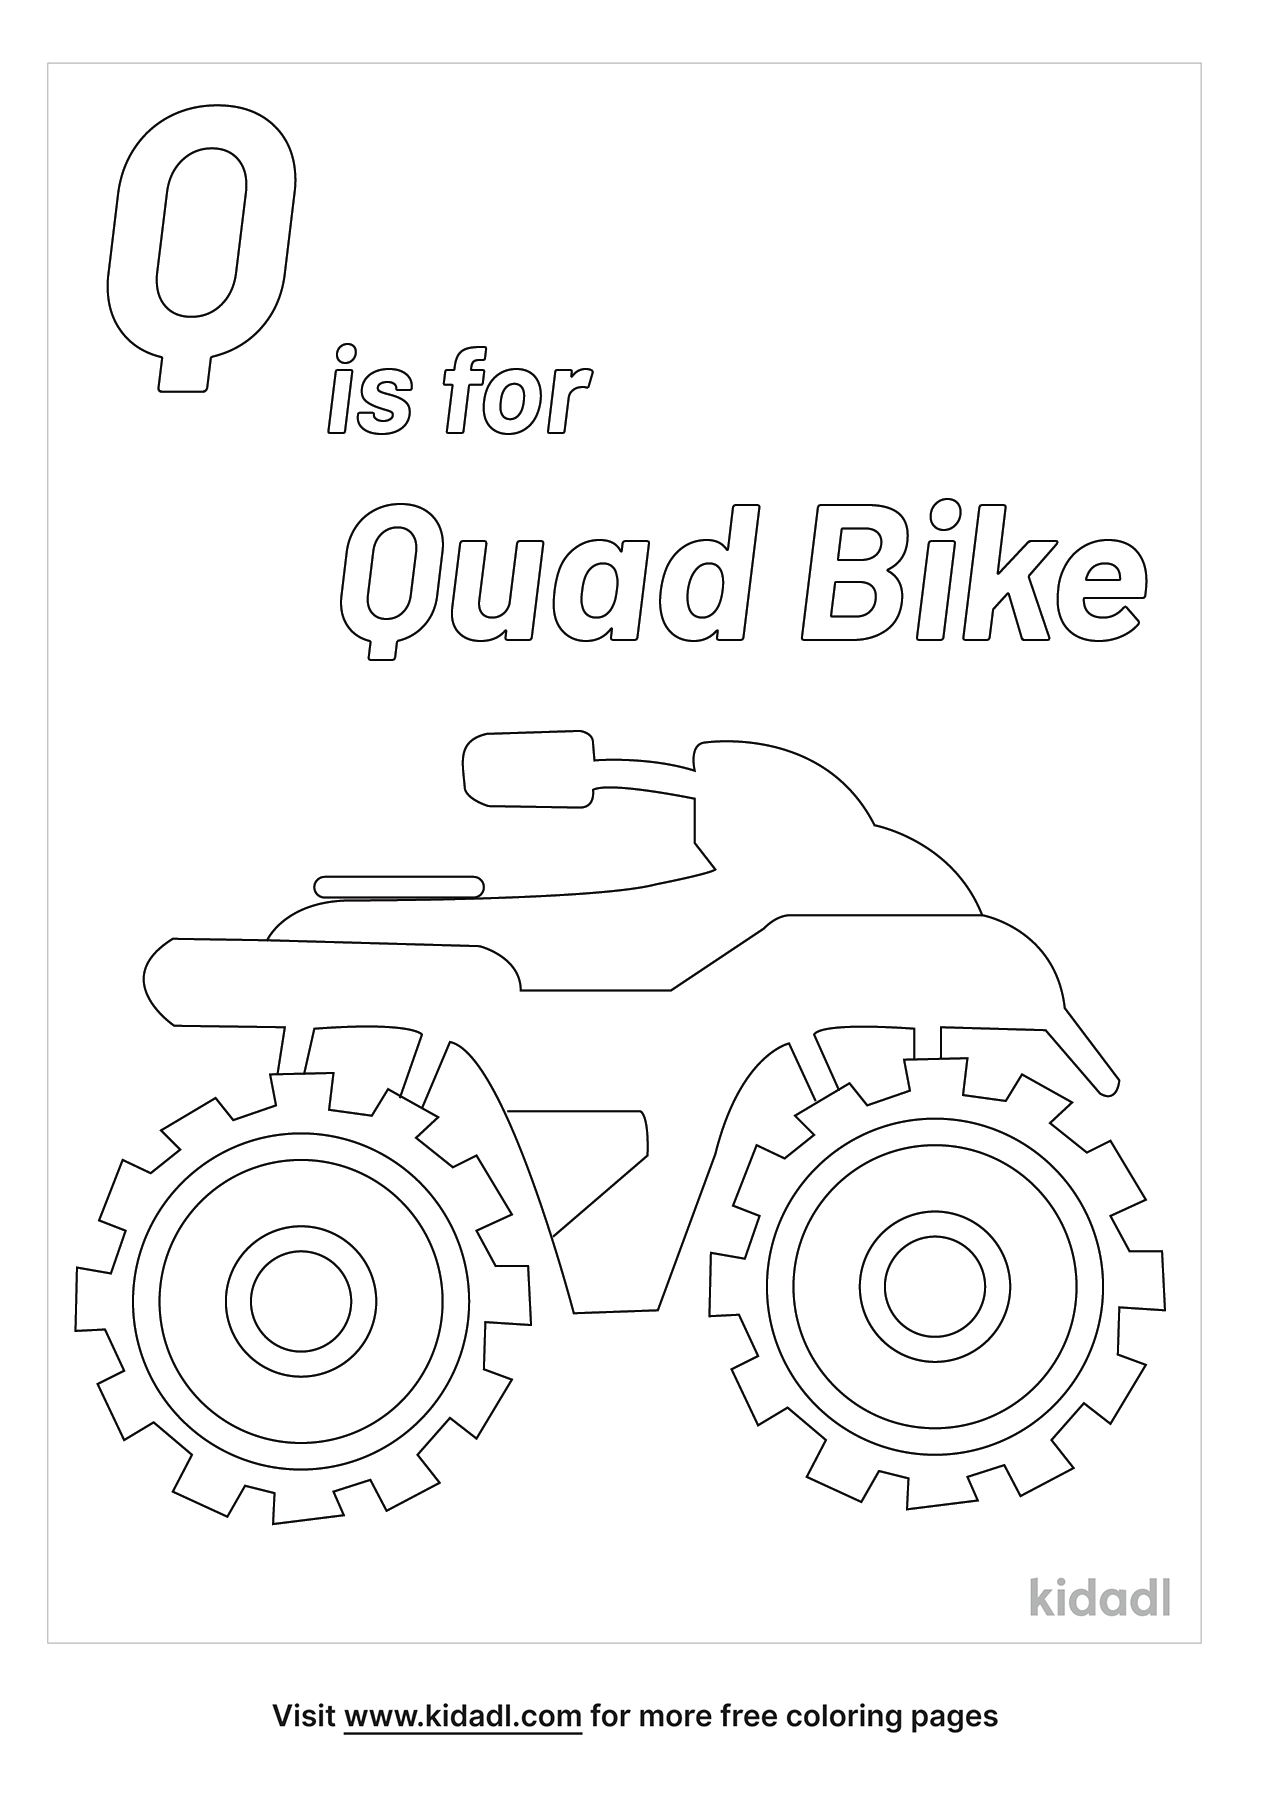 Q Is For Quad Bike Coloring Pages | Free Letters Coloring Pages | Kidadl